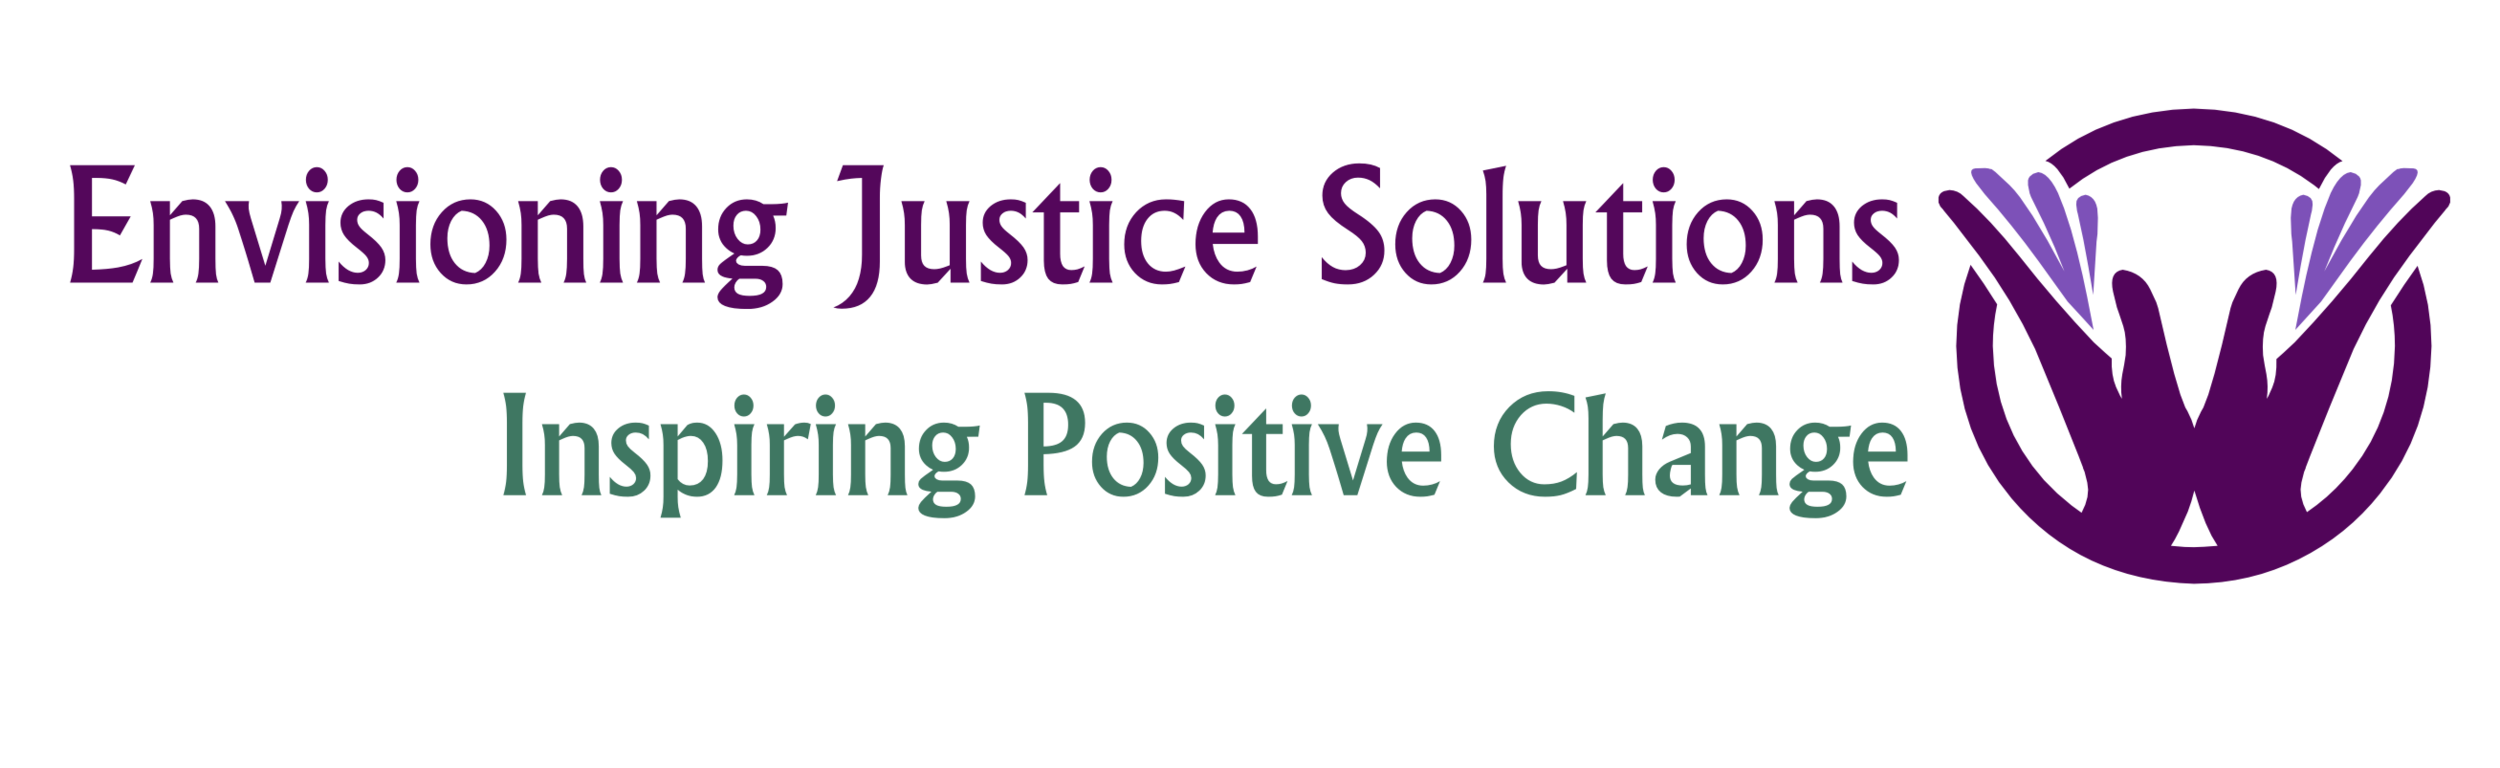 Envisioning Justice Solutions